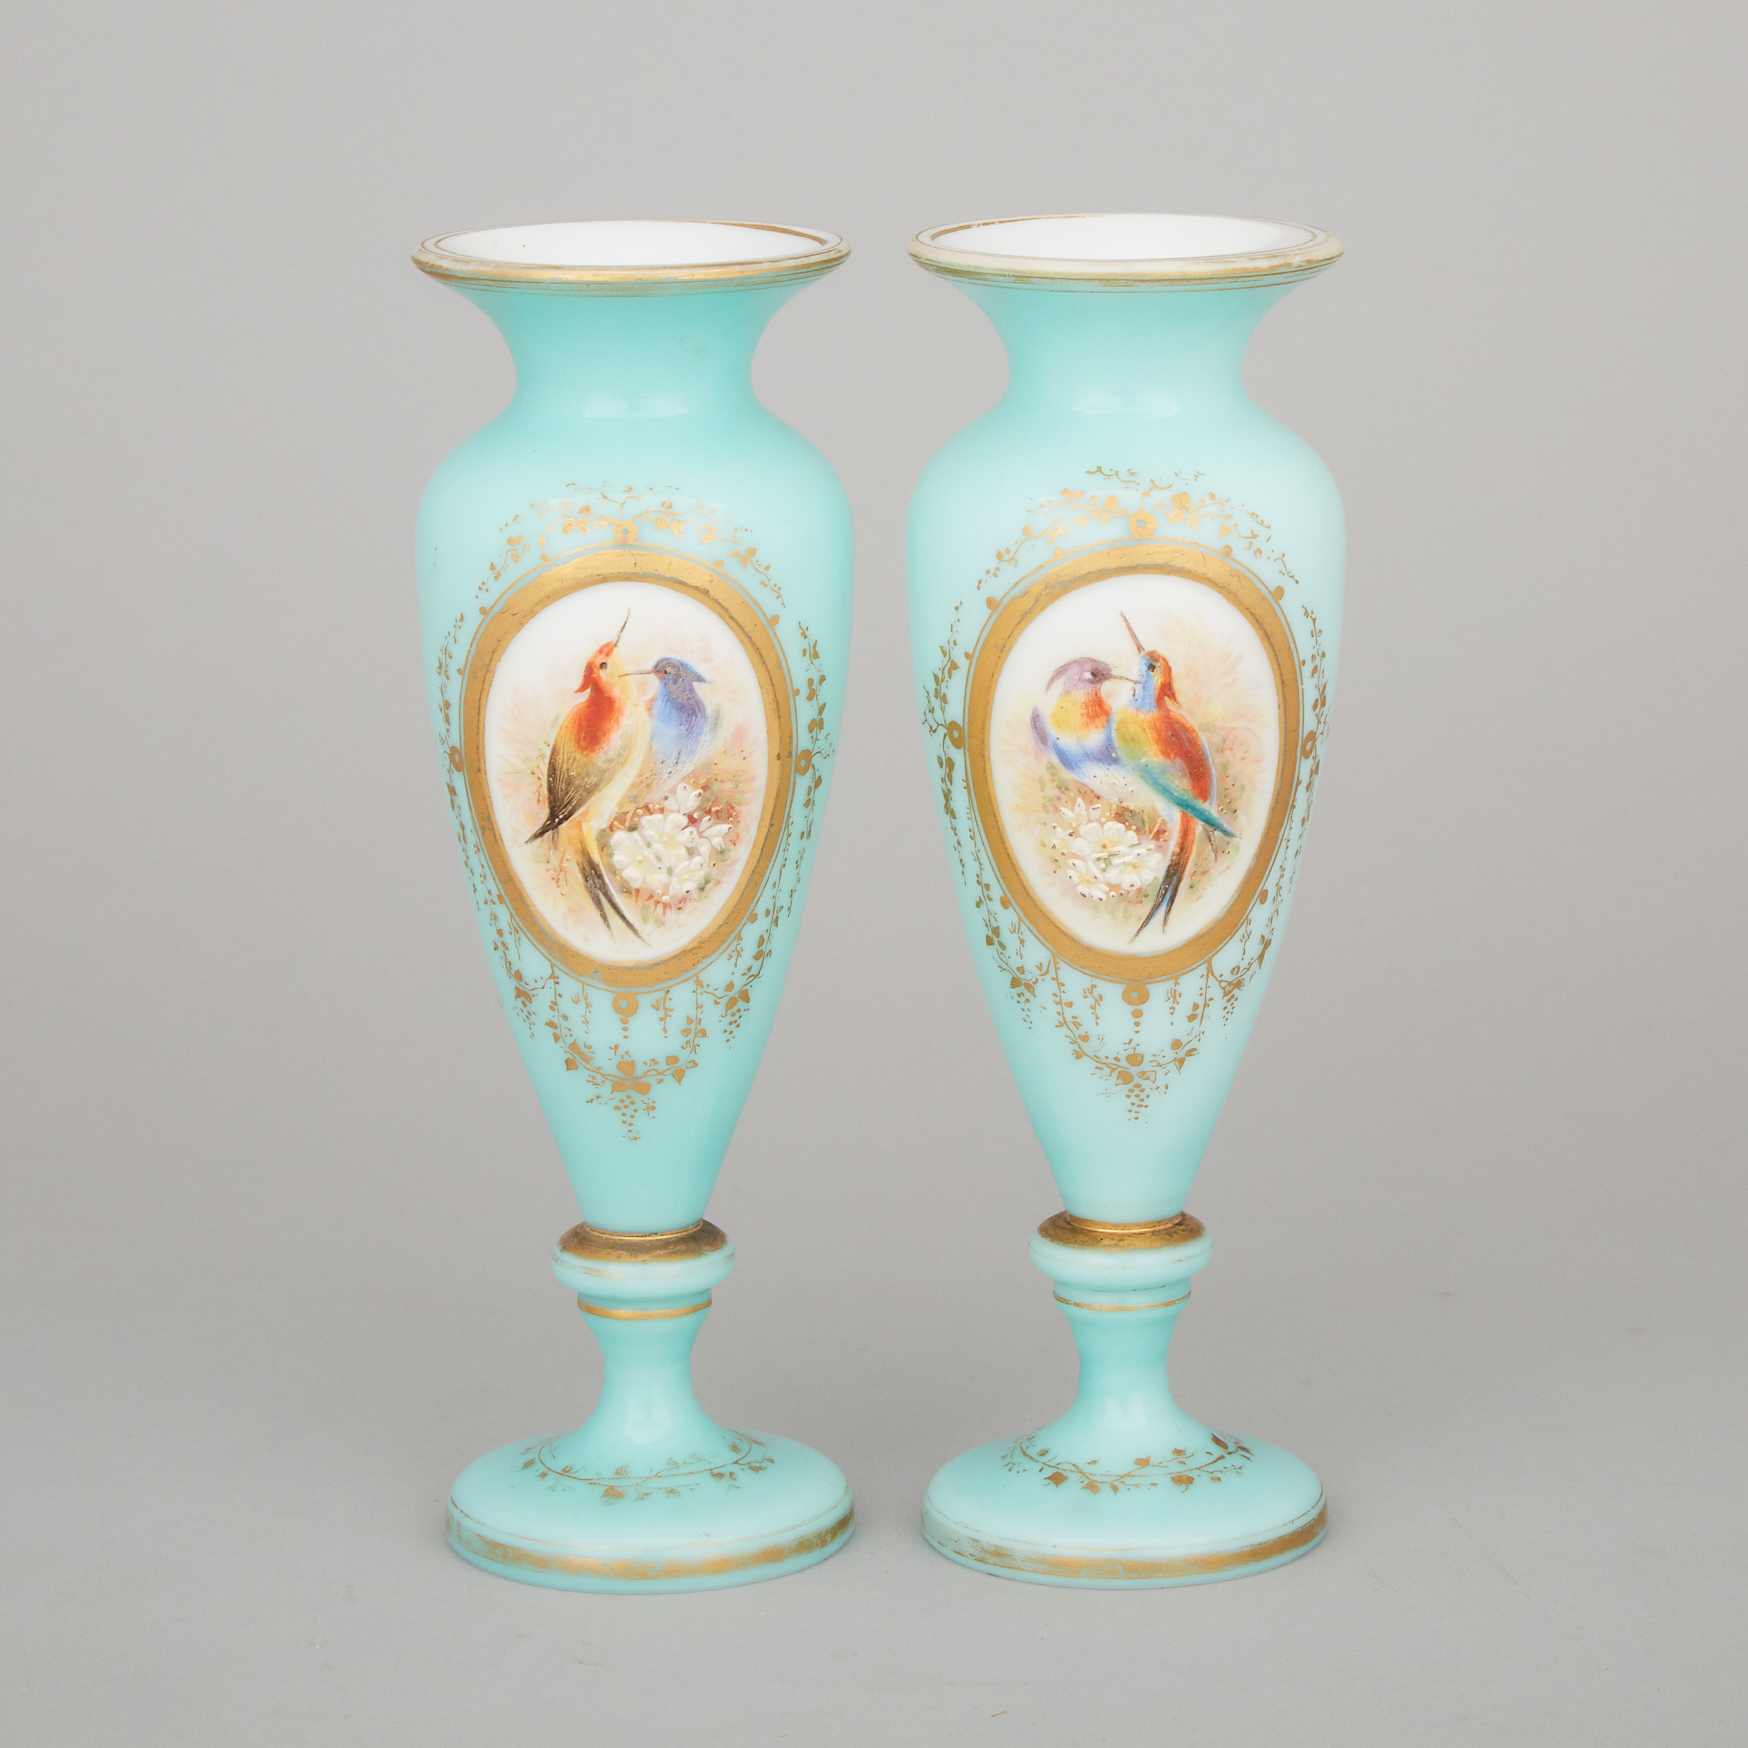 Pair of French Blue Overlaid, Enameled and Gilt Opaline Glass Vases, c.1870